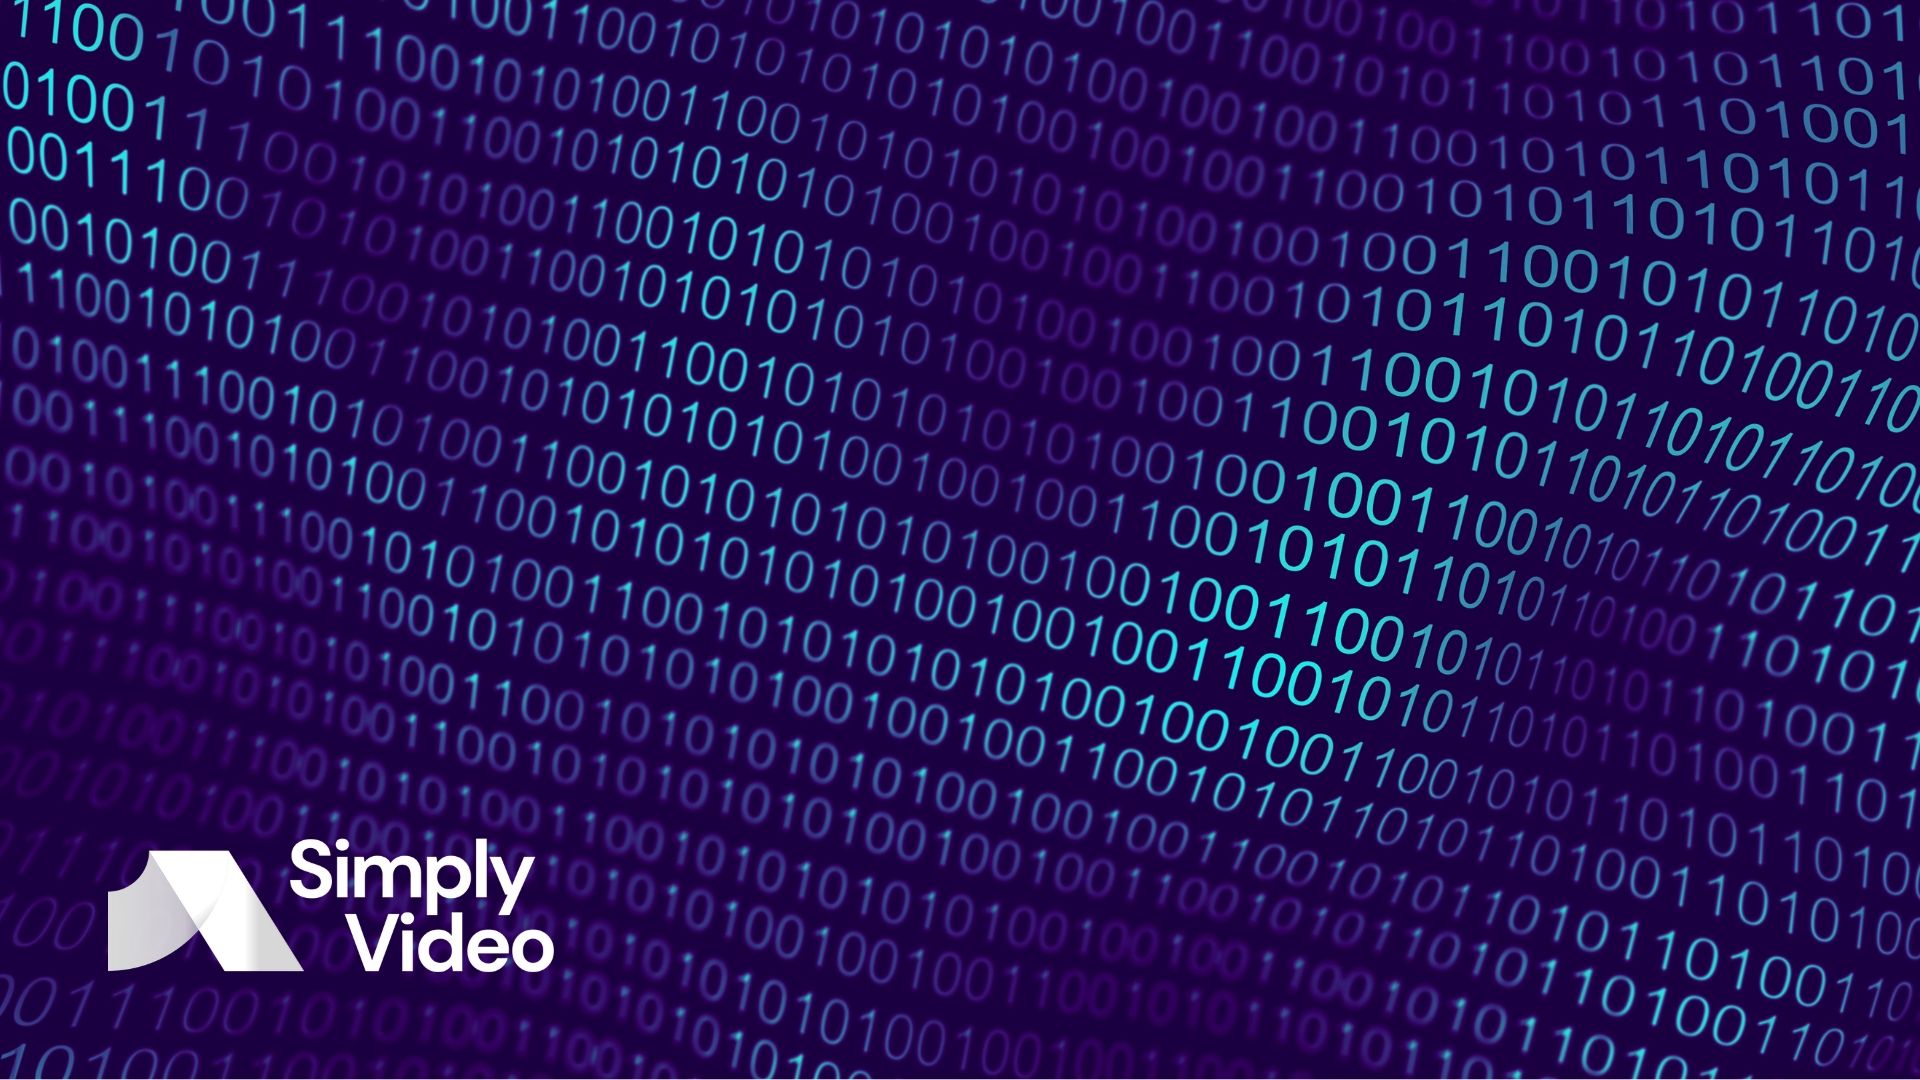 Extended reality (XR) is an industry that's built on interoperability. Discover how SimplyVideo can integrate with existing integrations and apps.
